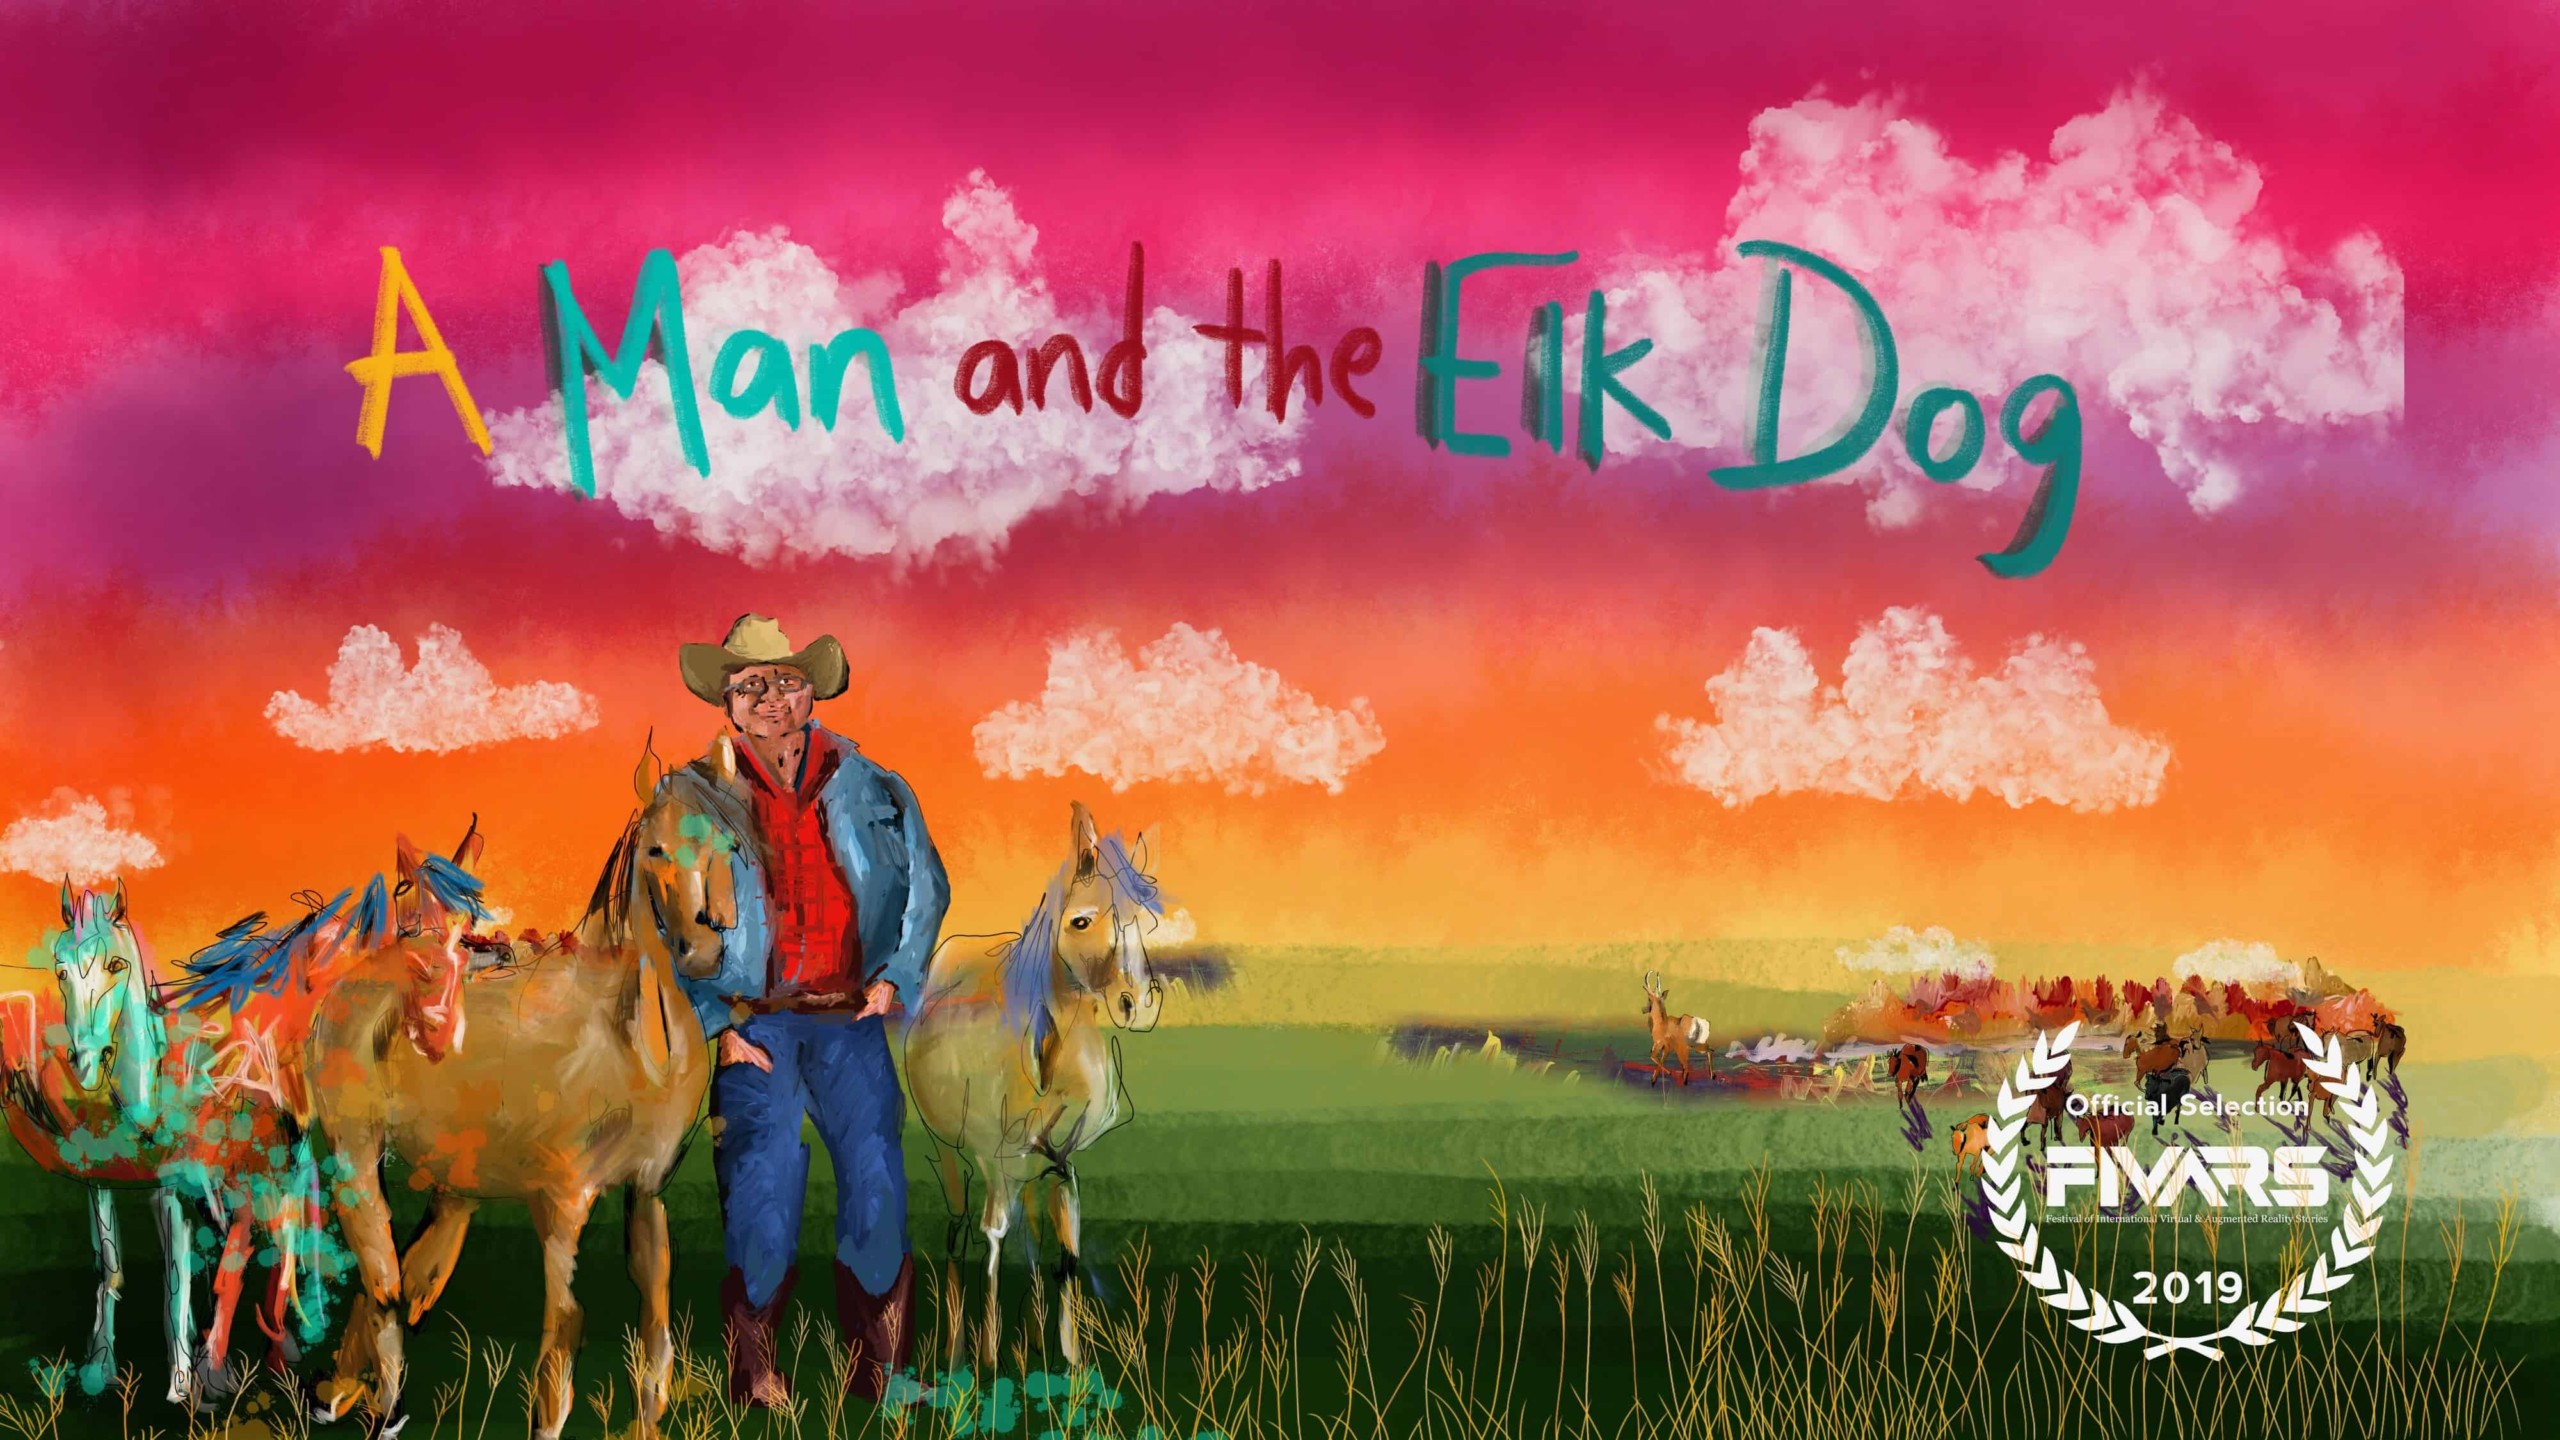 The Man and the Elk Dog